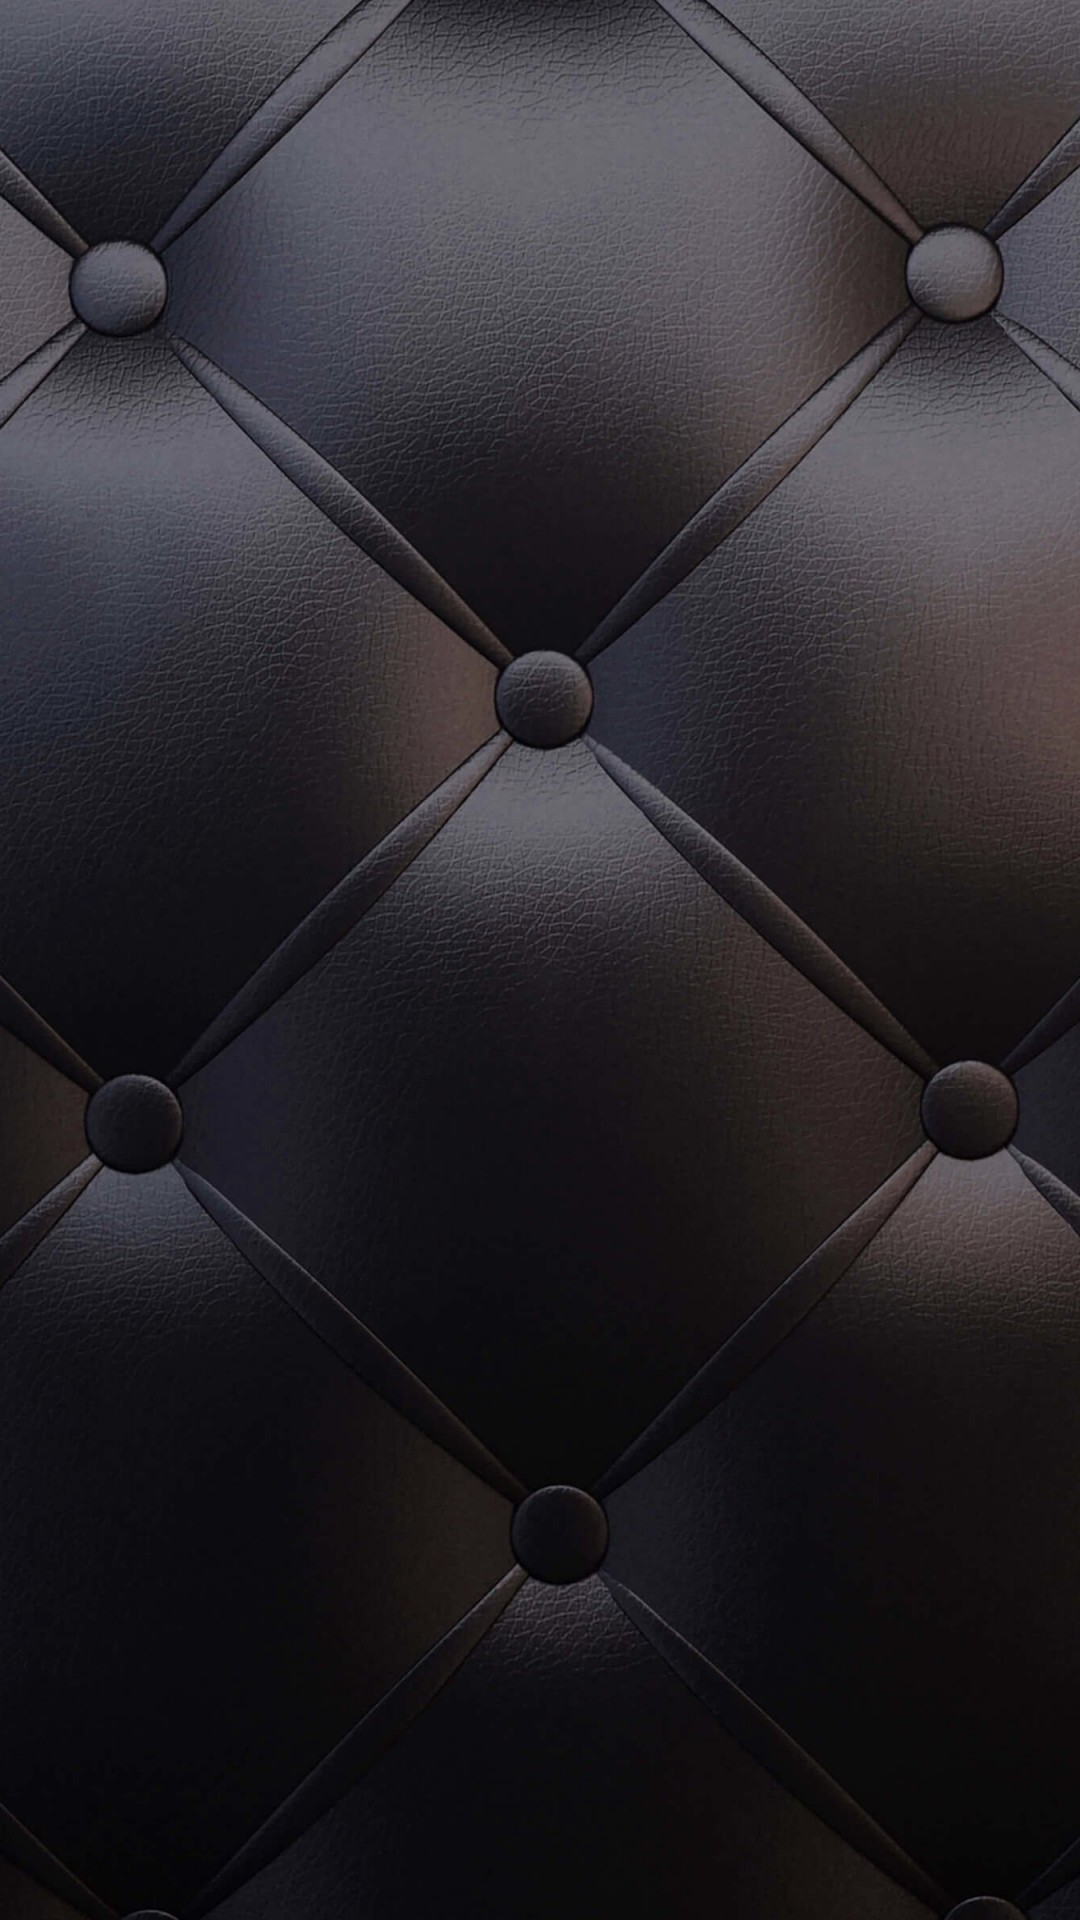 Black Leather Vintage Sofa Wallpaper for HTC One